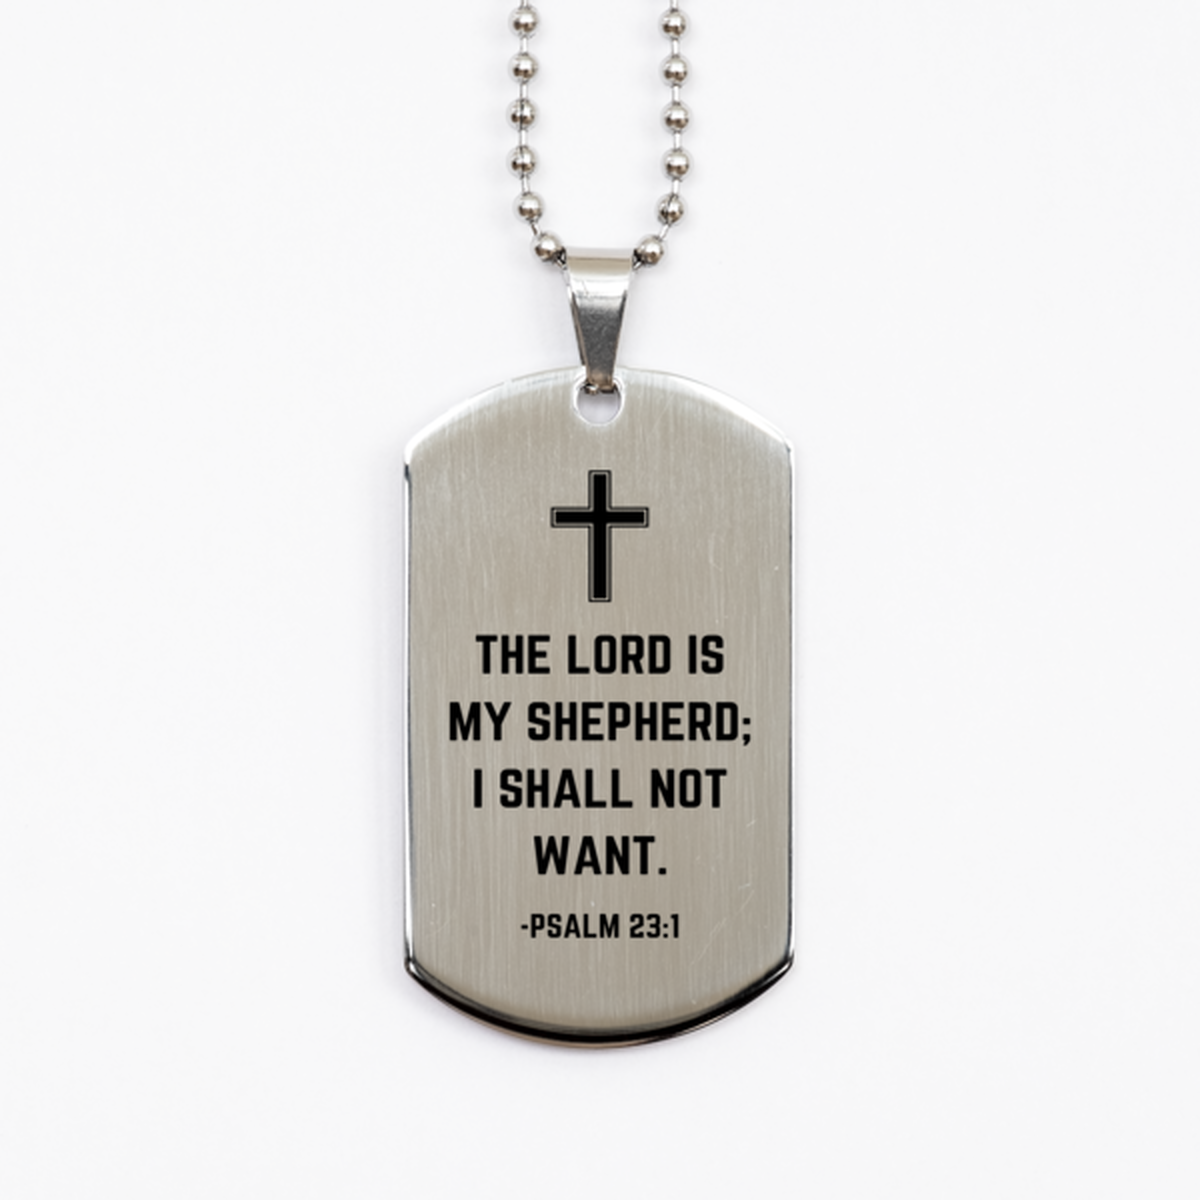 Baptism Gifts For Teenage Boys Girls, Christian Bible Verse Silver Dog Tag, The Lord is my shepherd, Confirmation Gifts, Bible Verse Necklace for Son, Godson, Grandson, Nephew